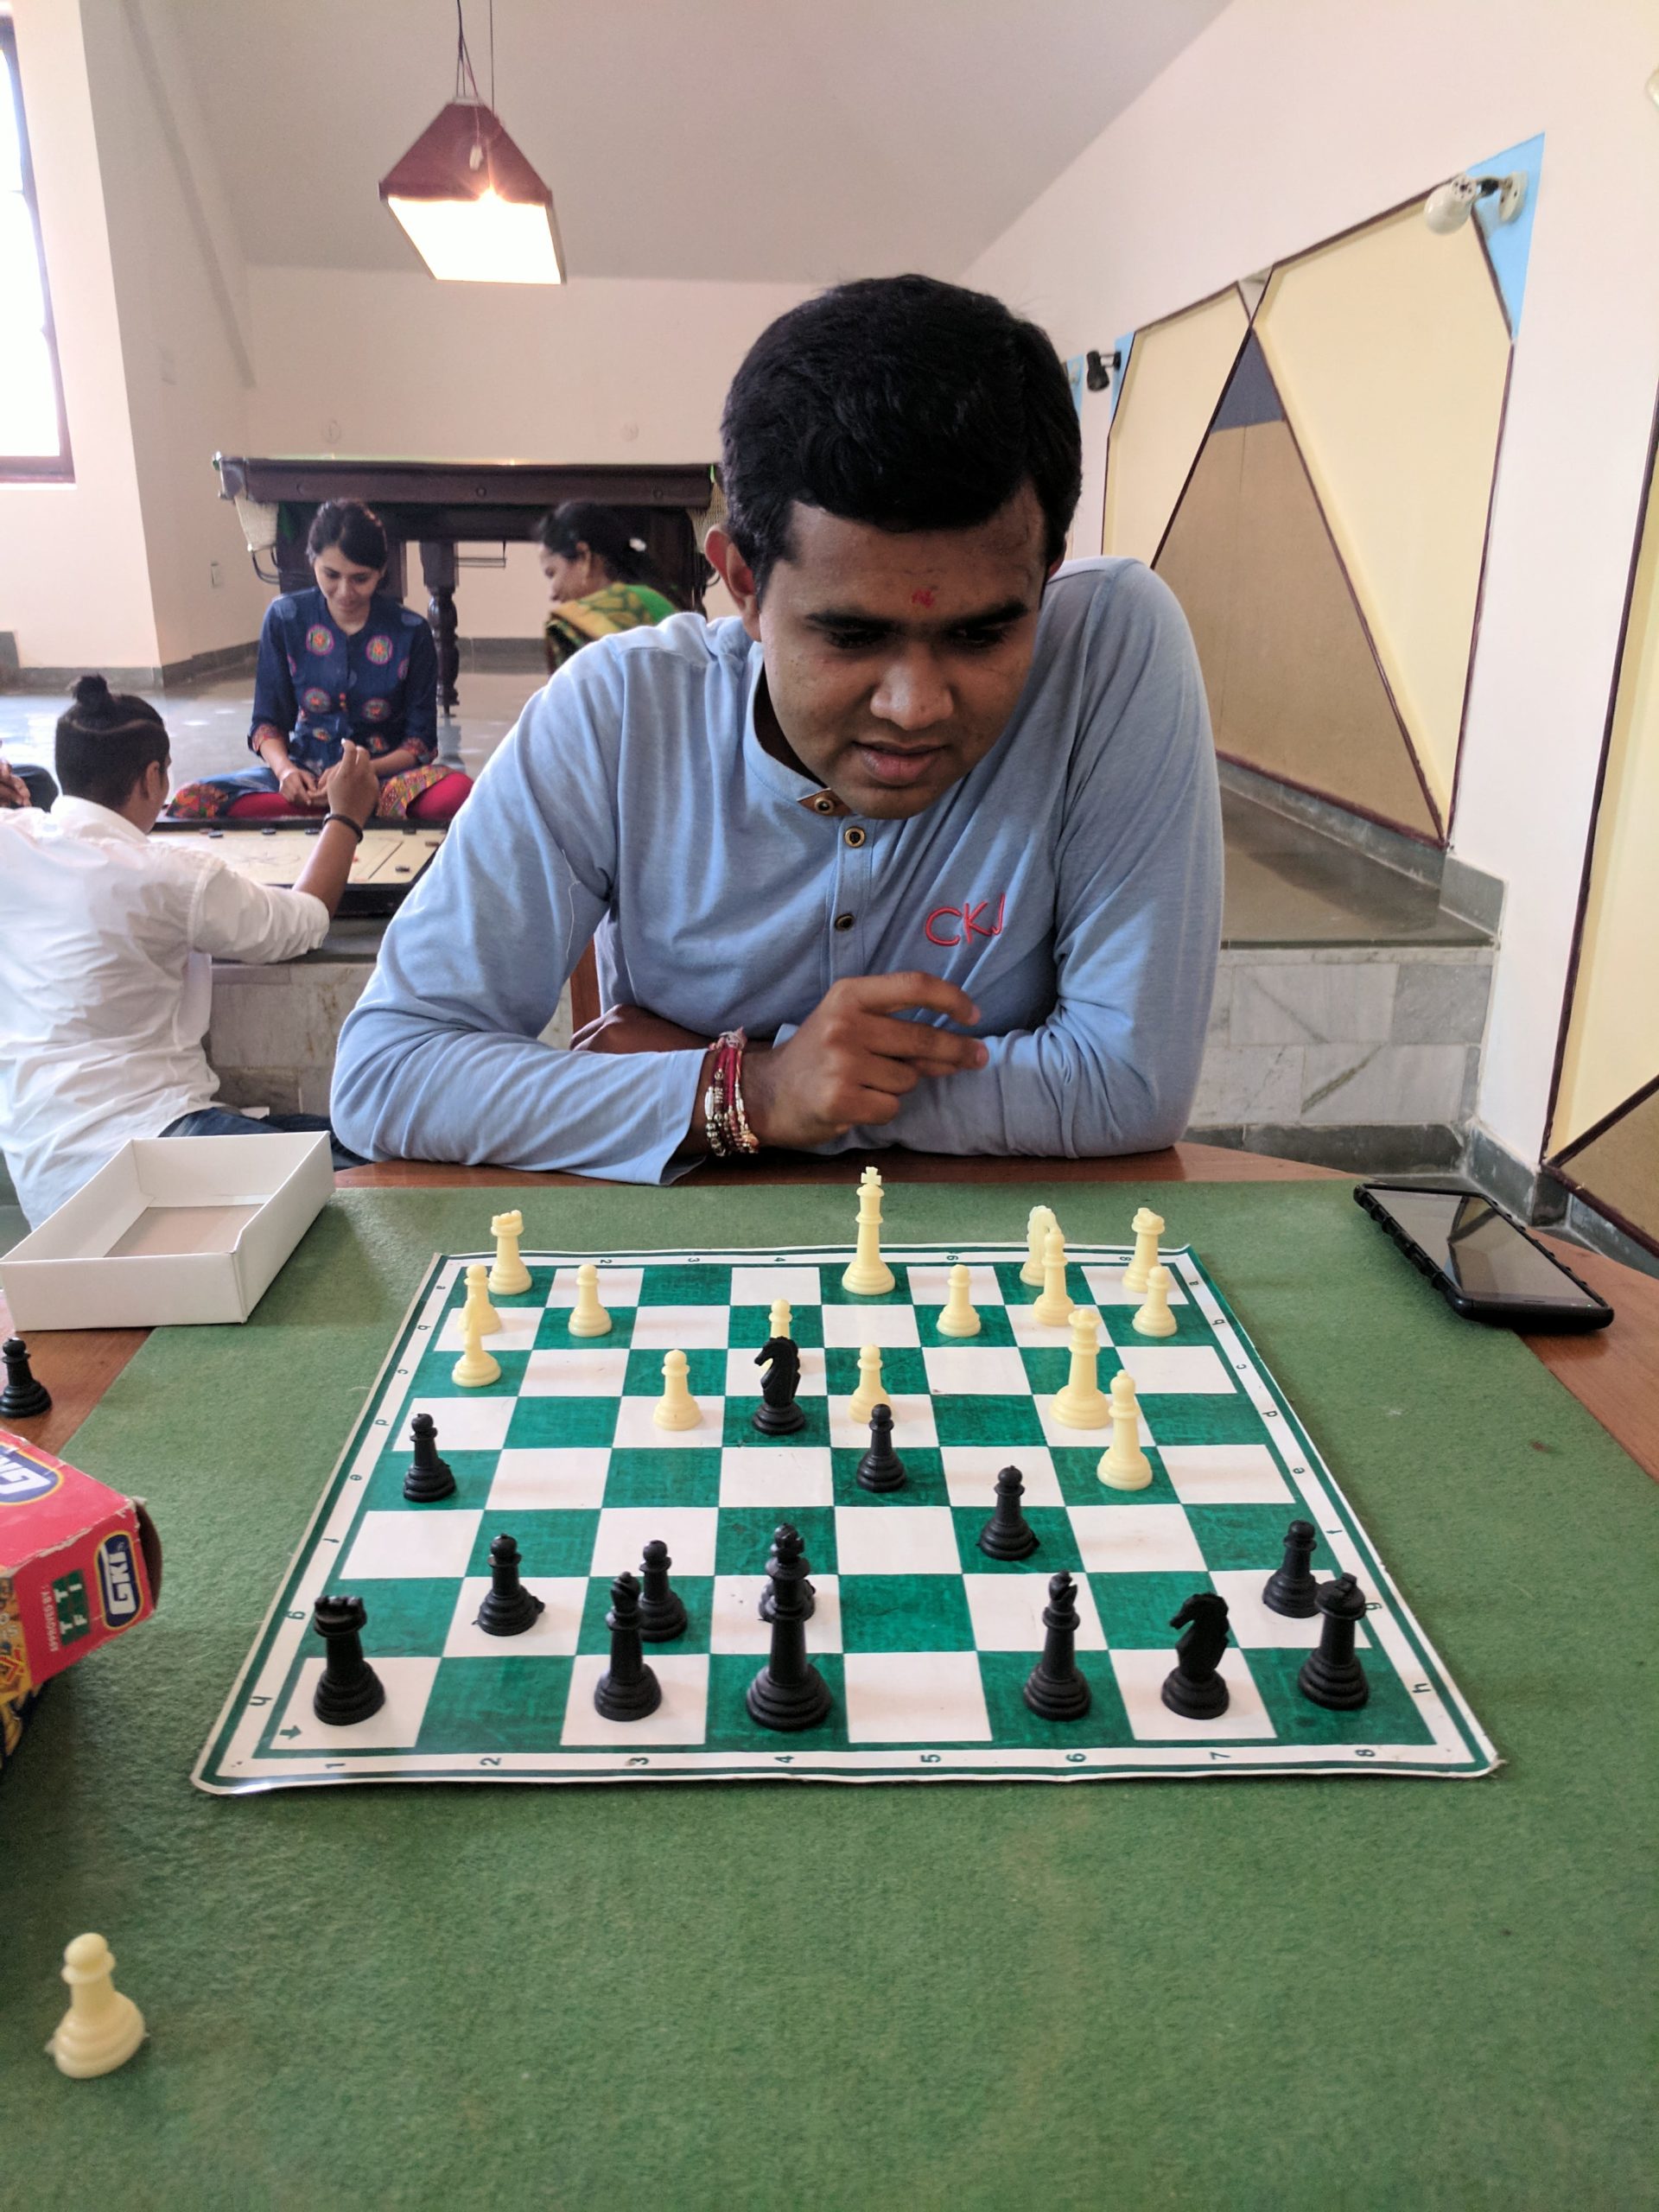 Students playing indoor games in campus